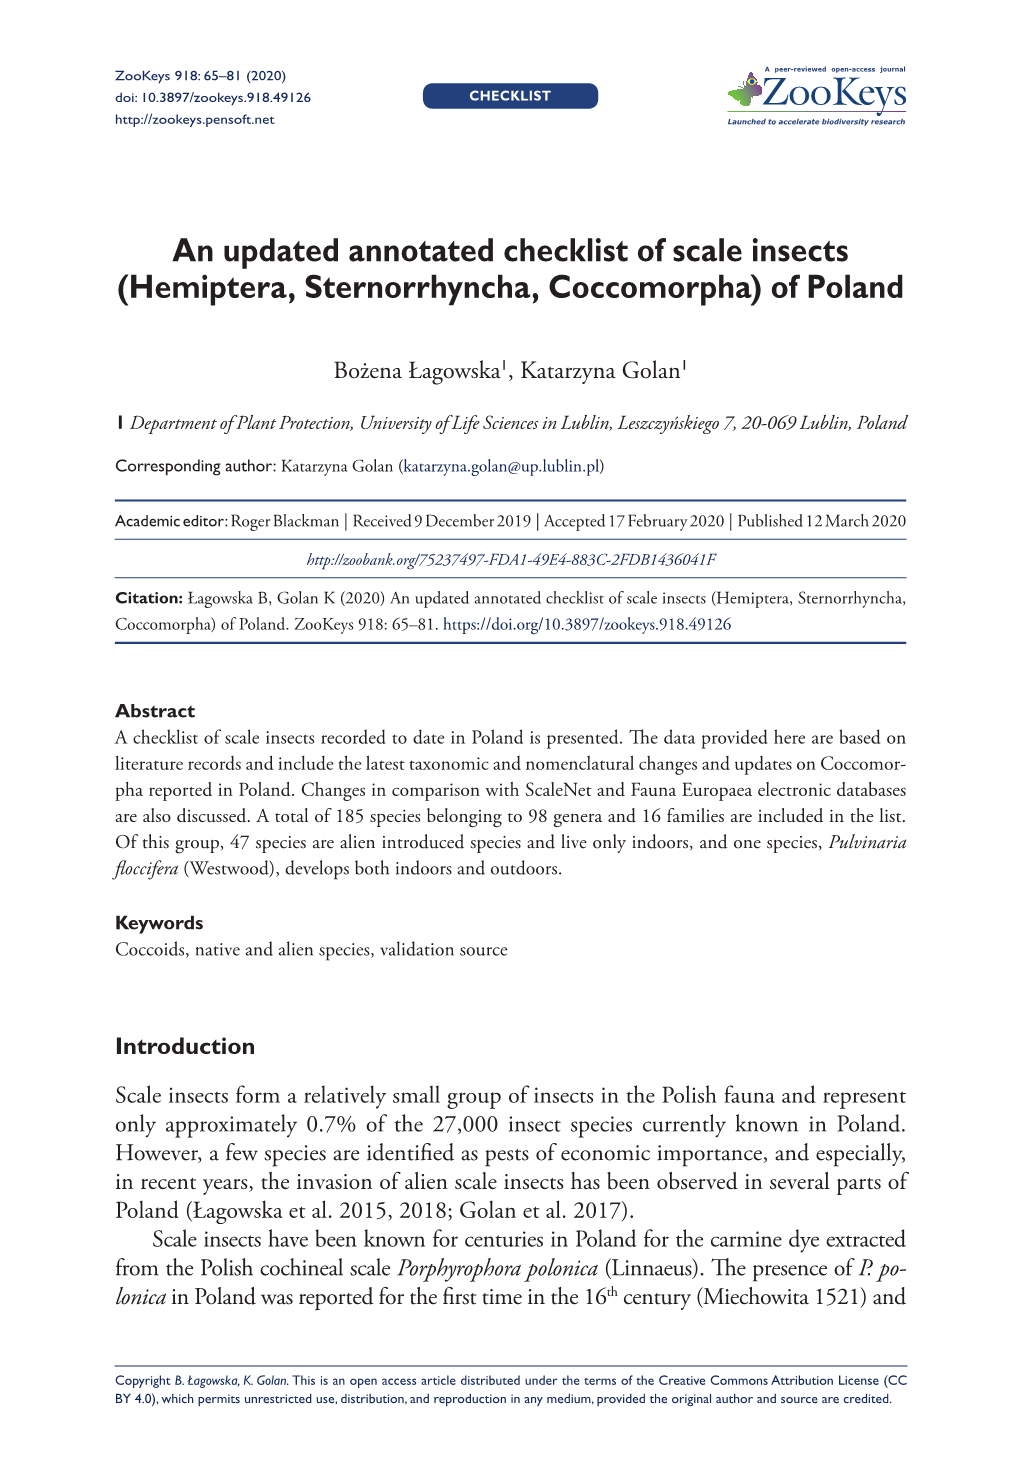 An Updated Annotated Checklist of Scale Insects (Hemiptera, Sternorrhyncha, Coccomorpha) of Poland